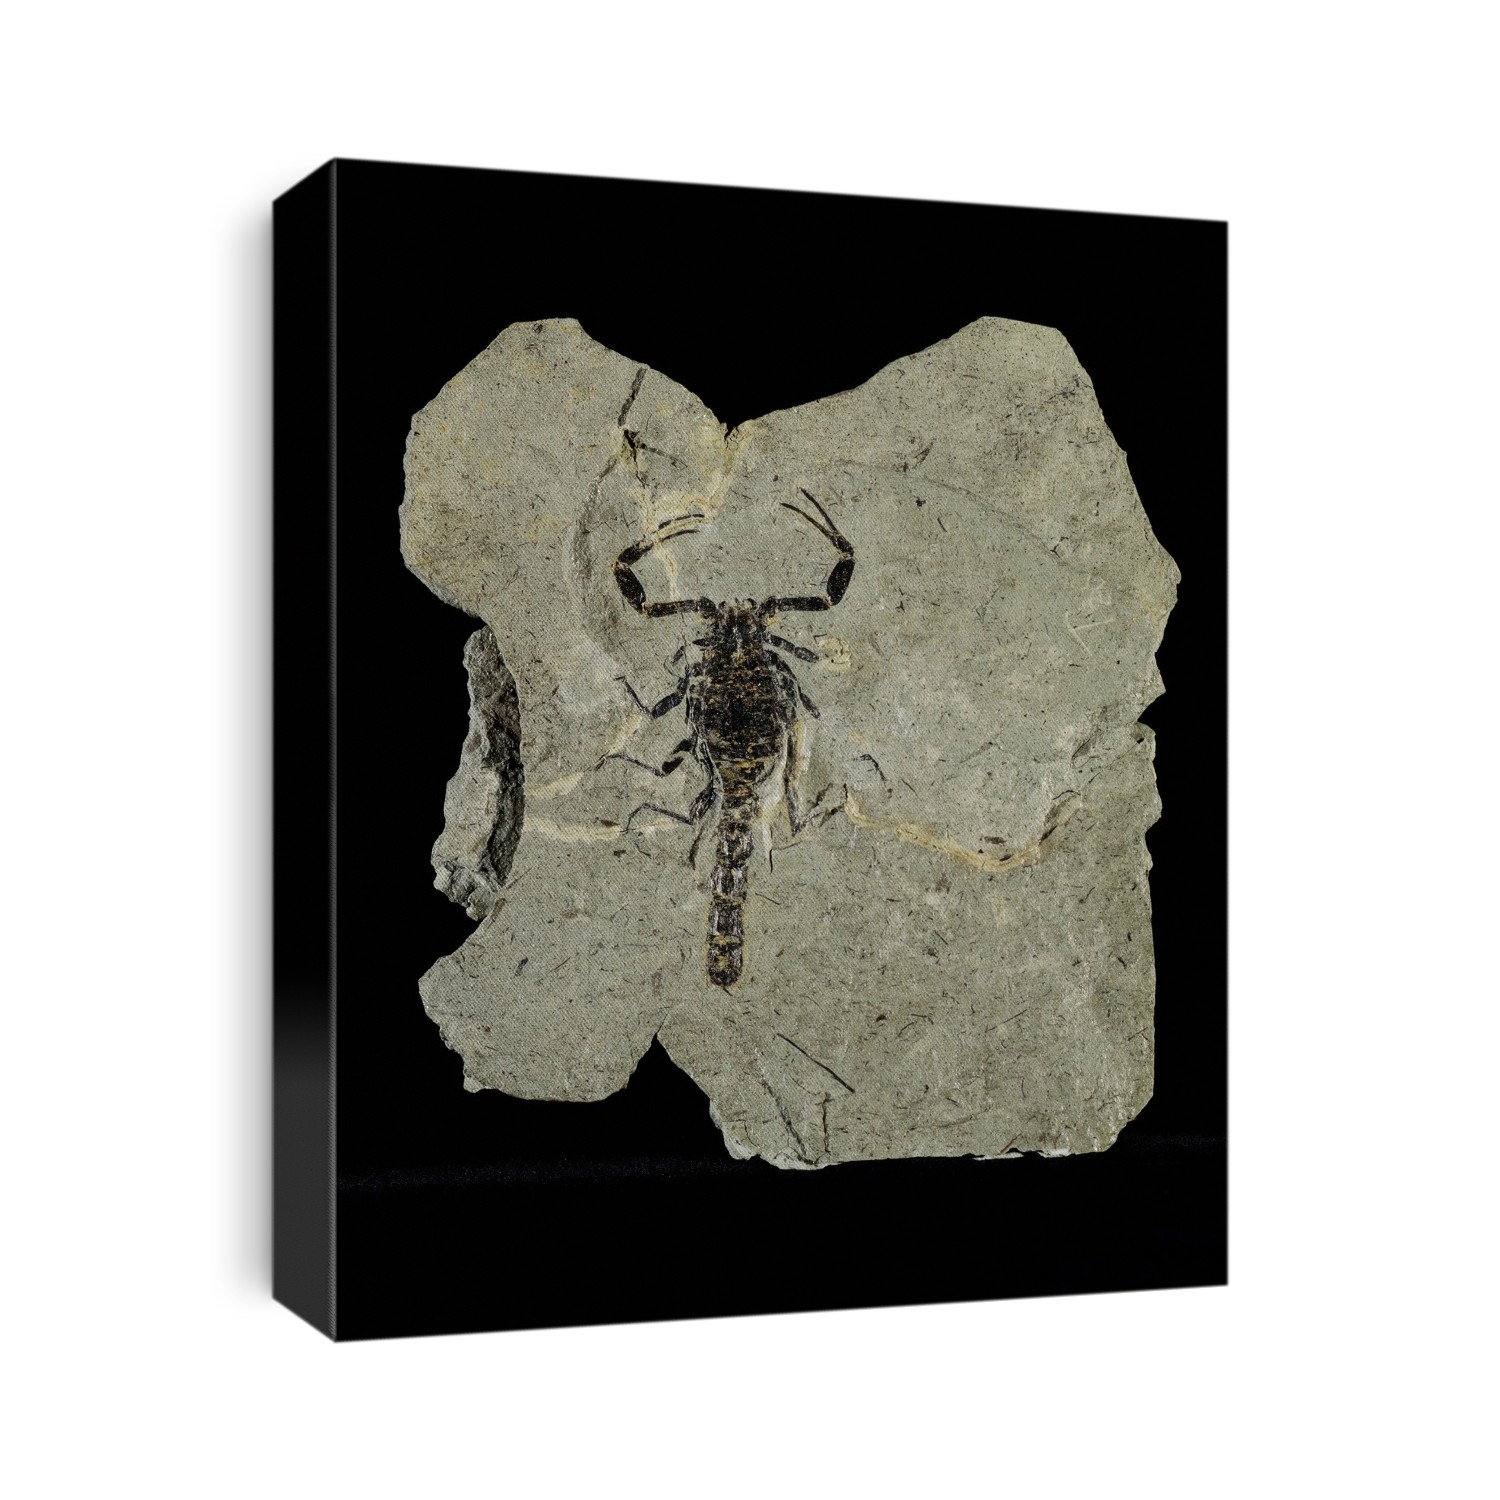 Gallio scorpion fossil. Sandstone block containing a fossilised specimen of a Gallio scorpion. The scorpion is 6 centimetres long. This specimen dates from around 240 million years ago, during the Triassic. This fossil was found in the Voltzia sandstone quarries of the Vosges mountain range in northern France, and is part of the Grauvogel-Gall collection, held in Strasbourg, France. At this time, there was a large delta in what is now the Vosges region. Repeated sediment deposition and droughts led to the formation of fossils.